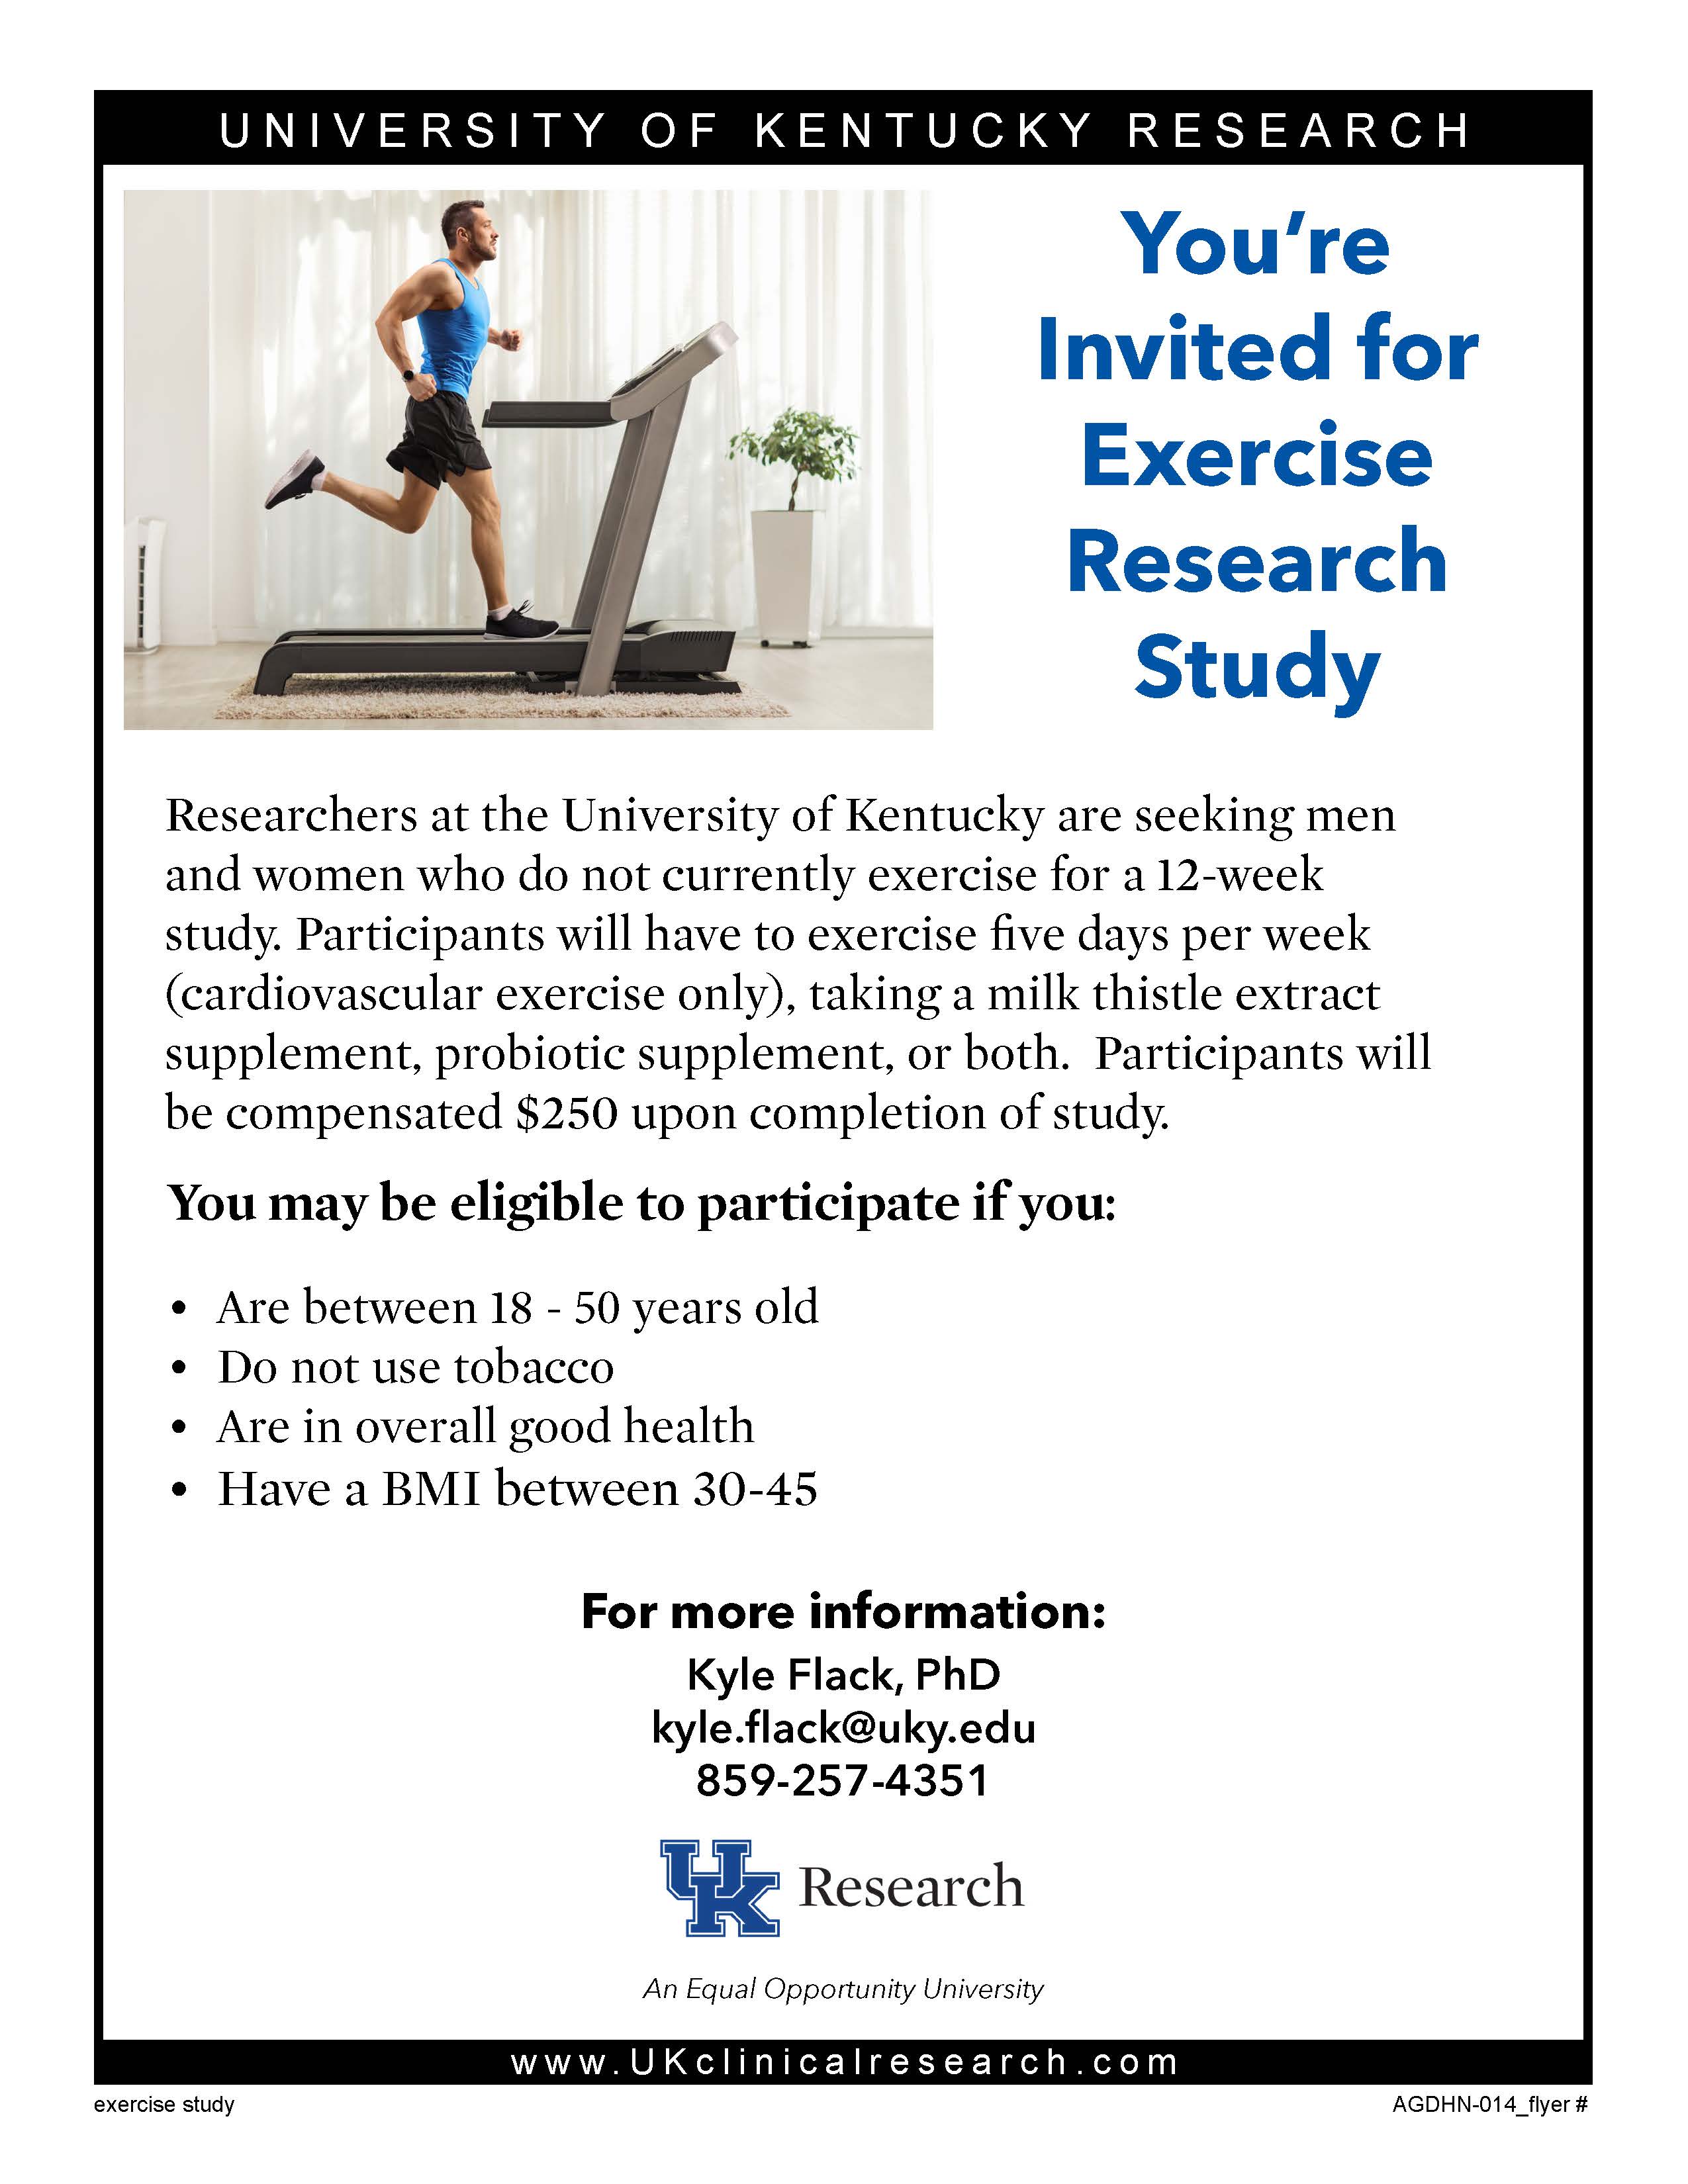 Exercise research flyer